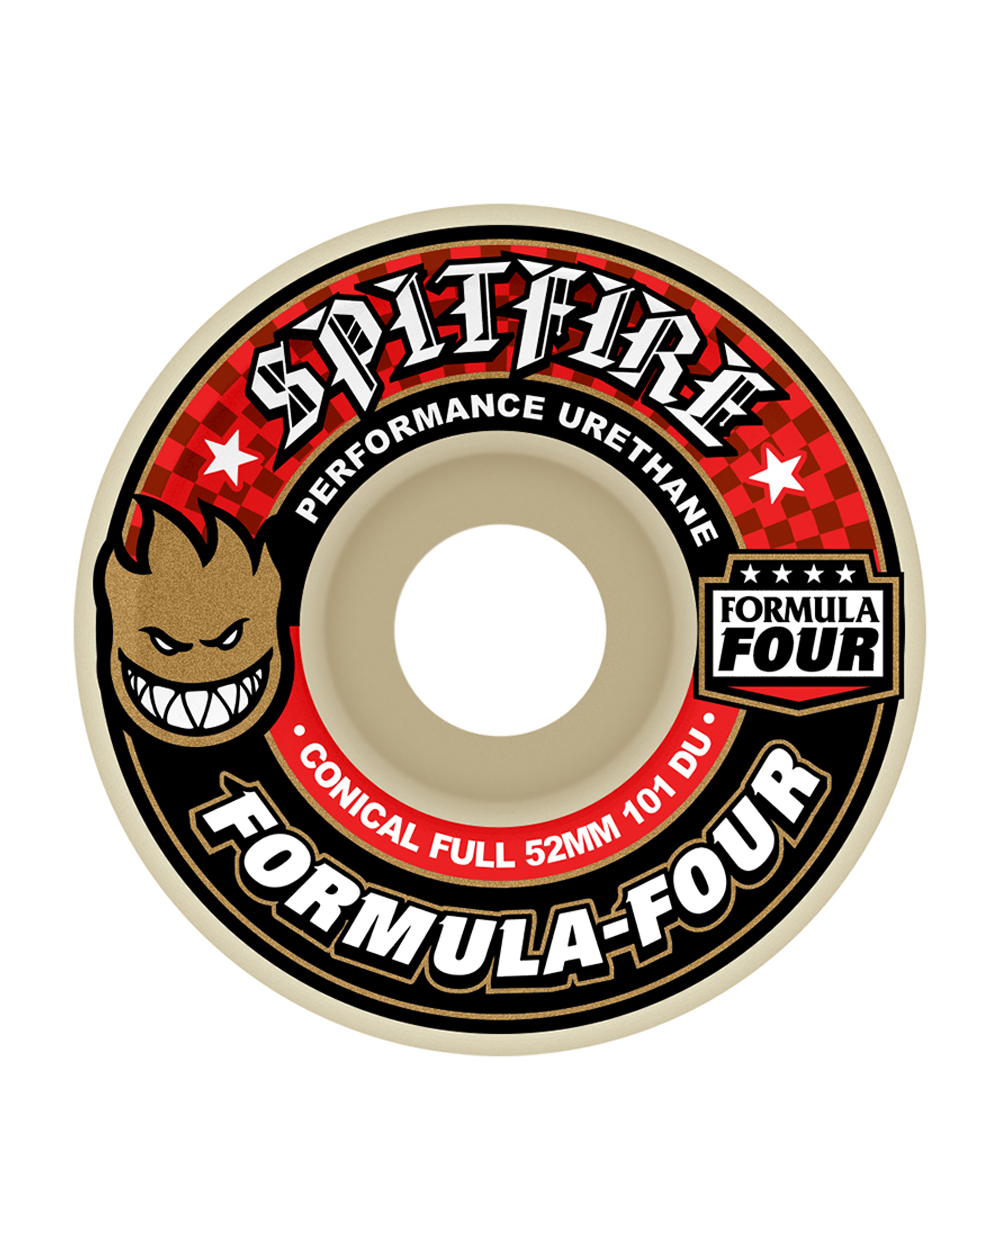 Spitfire Formula Four Conical Full 52mm 101A Skateboard Wheels pack of 4